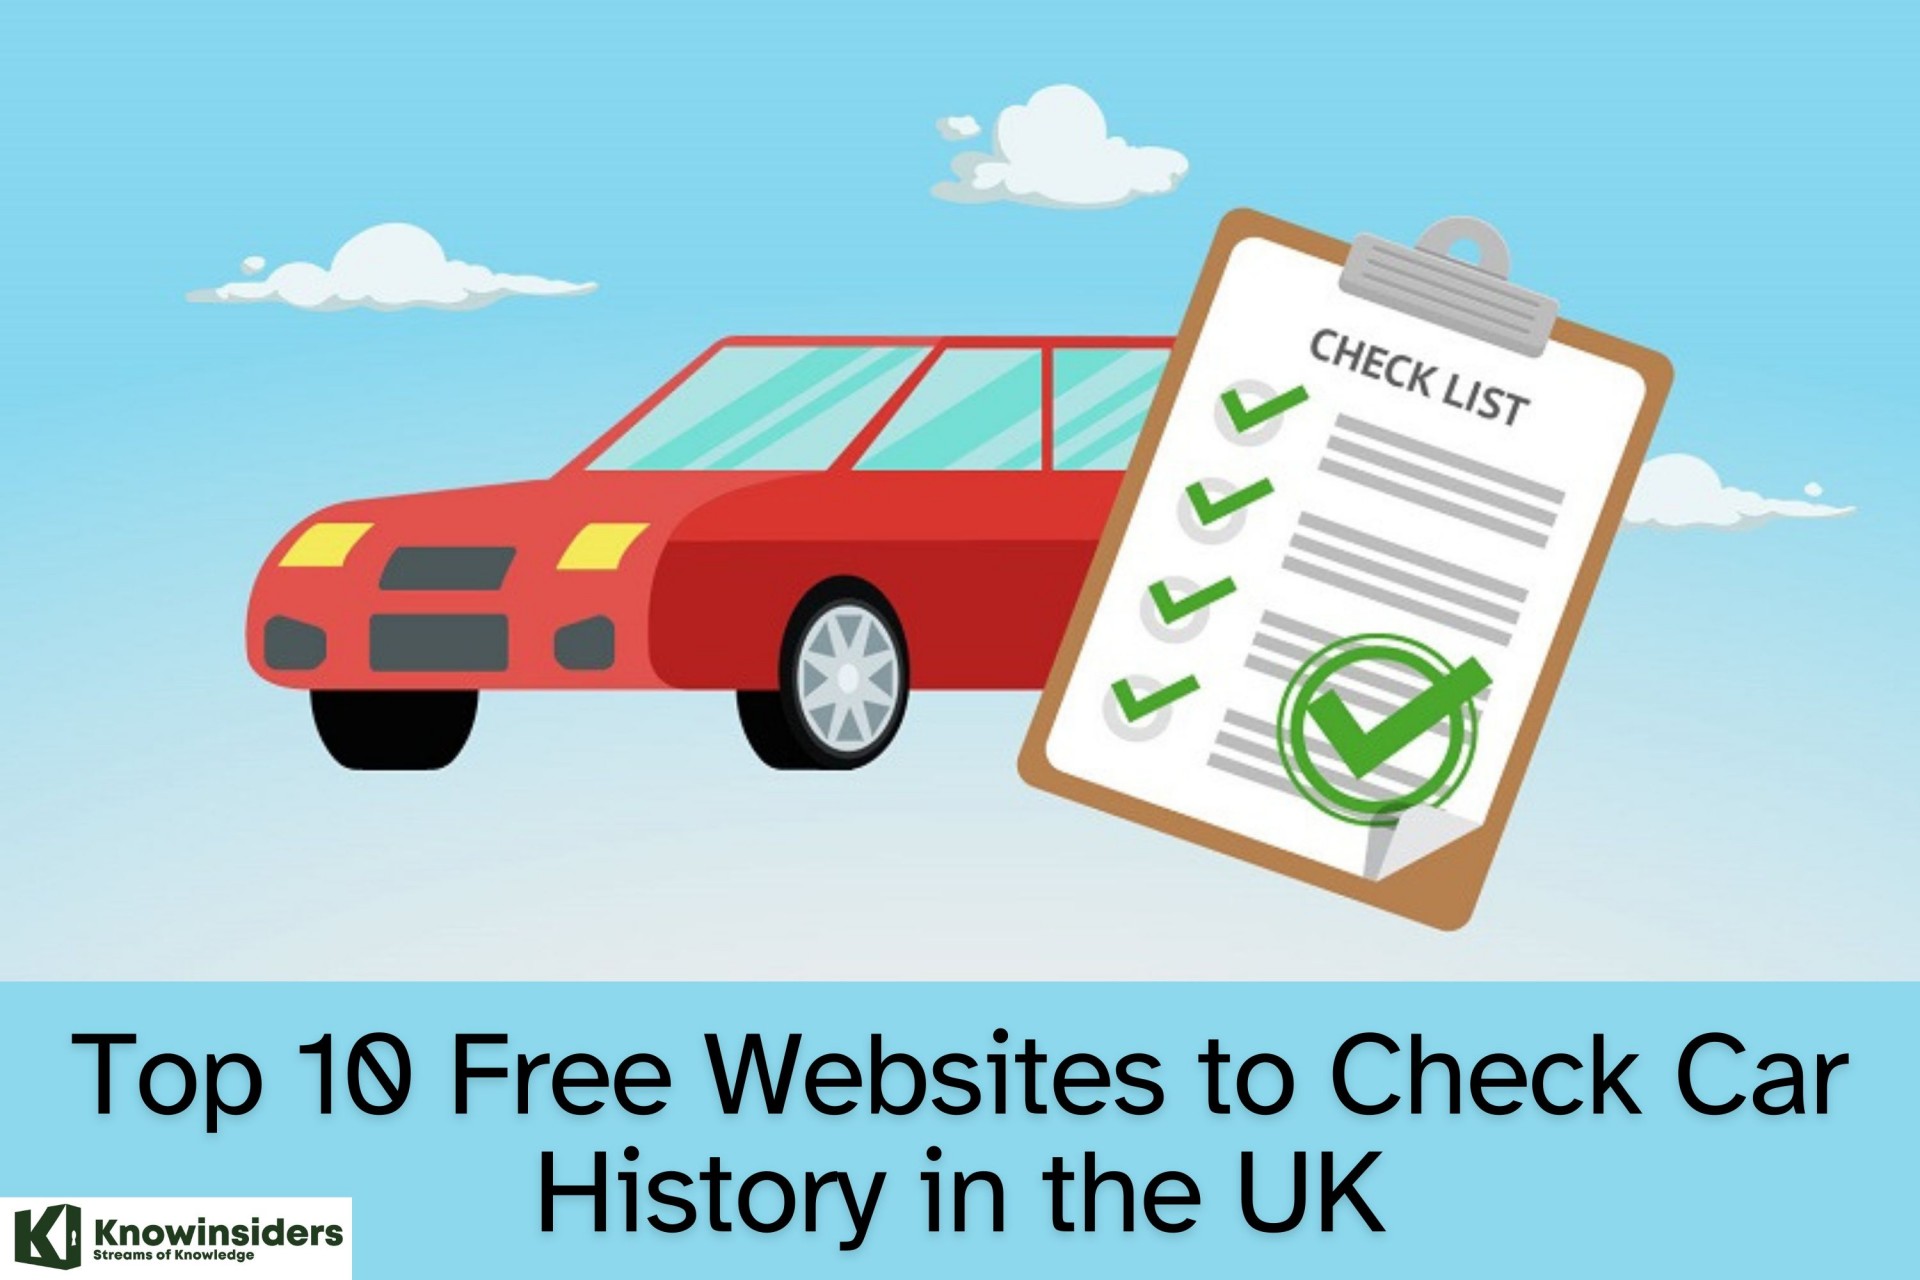 How to Check A Car History in the U.K - 10 Best Free Sites for the VIN/VRN/MOT